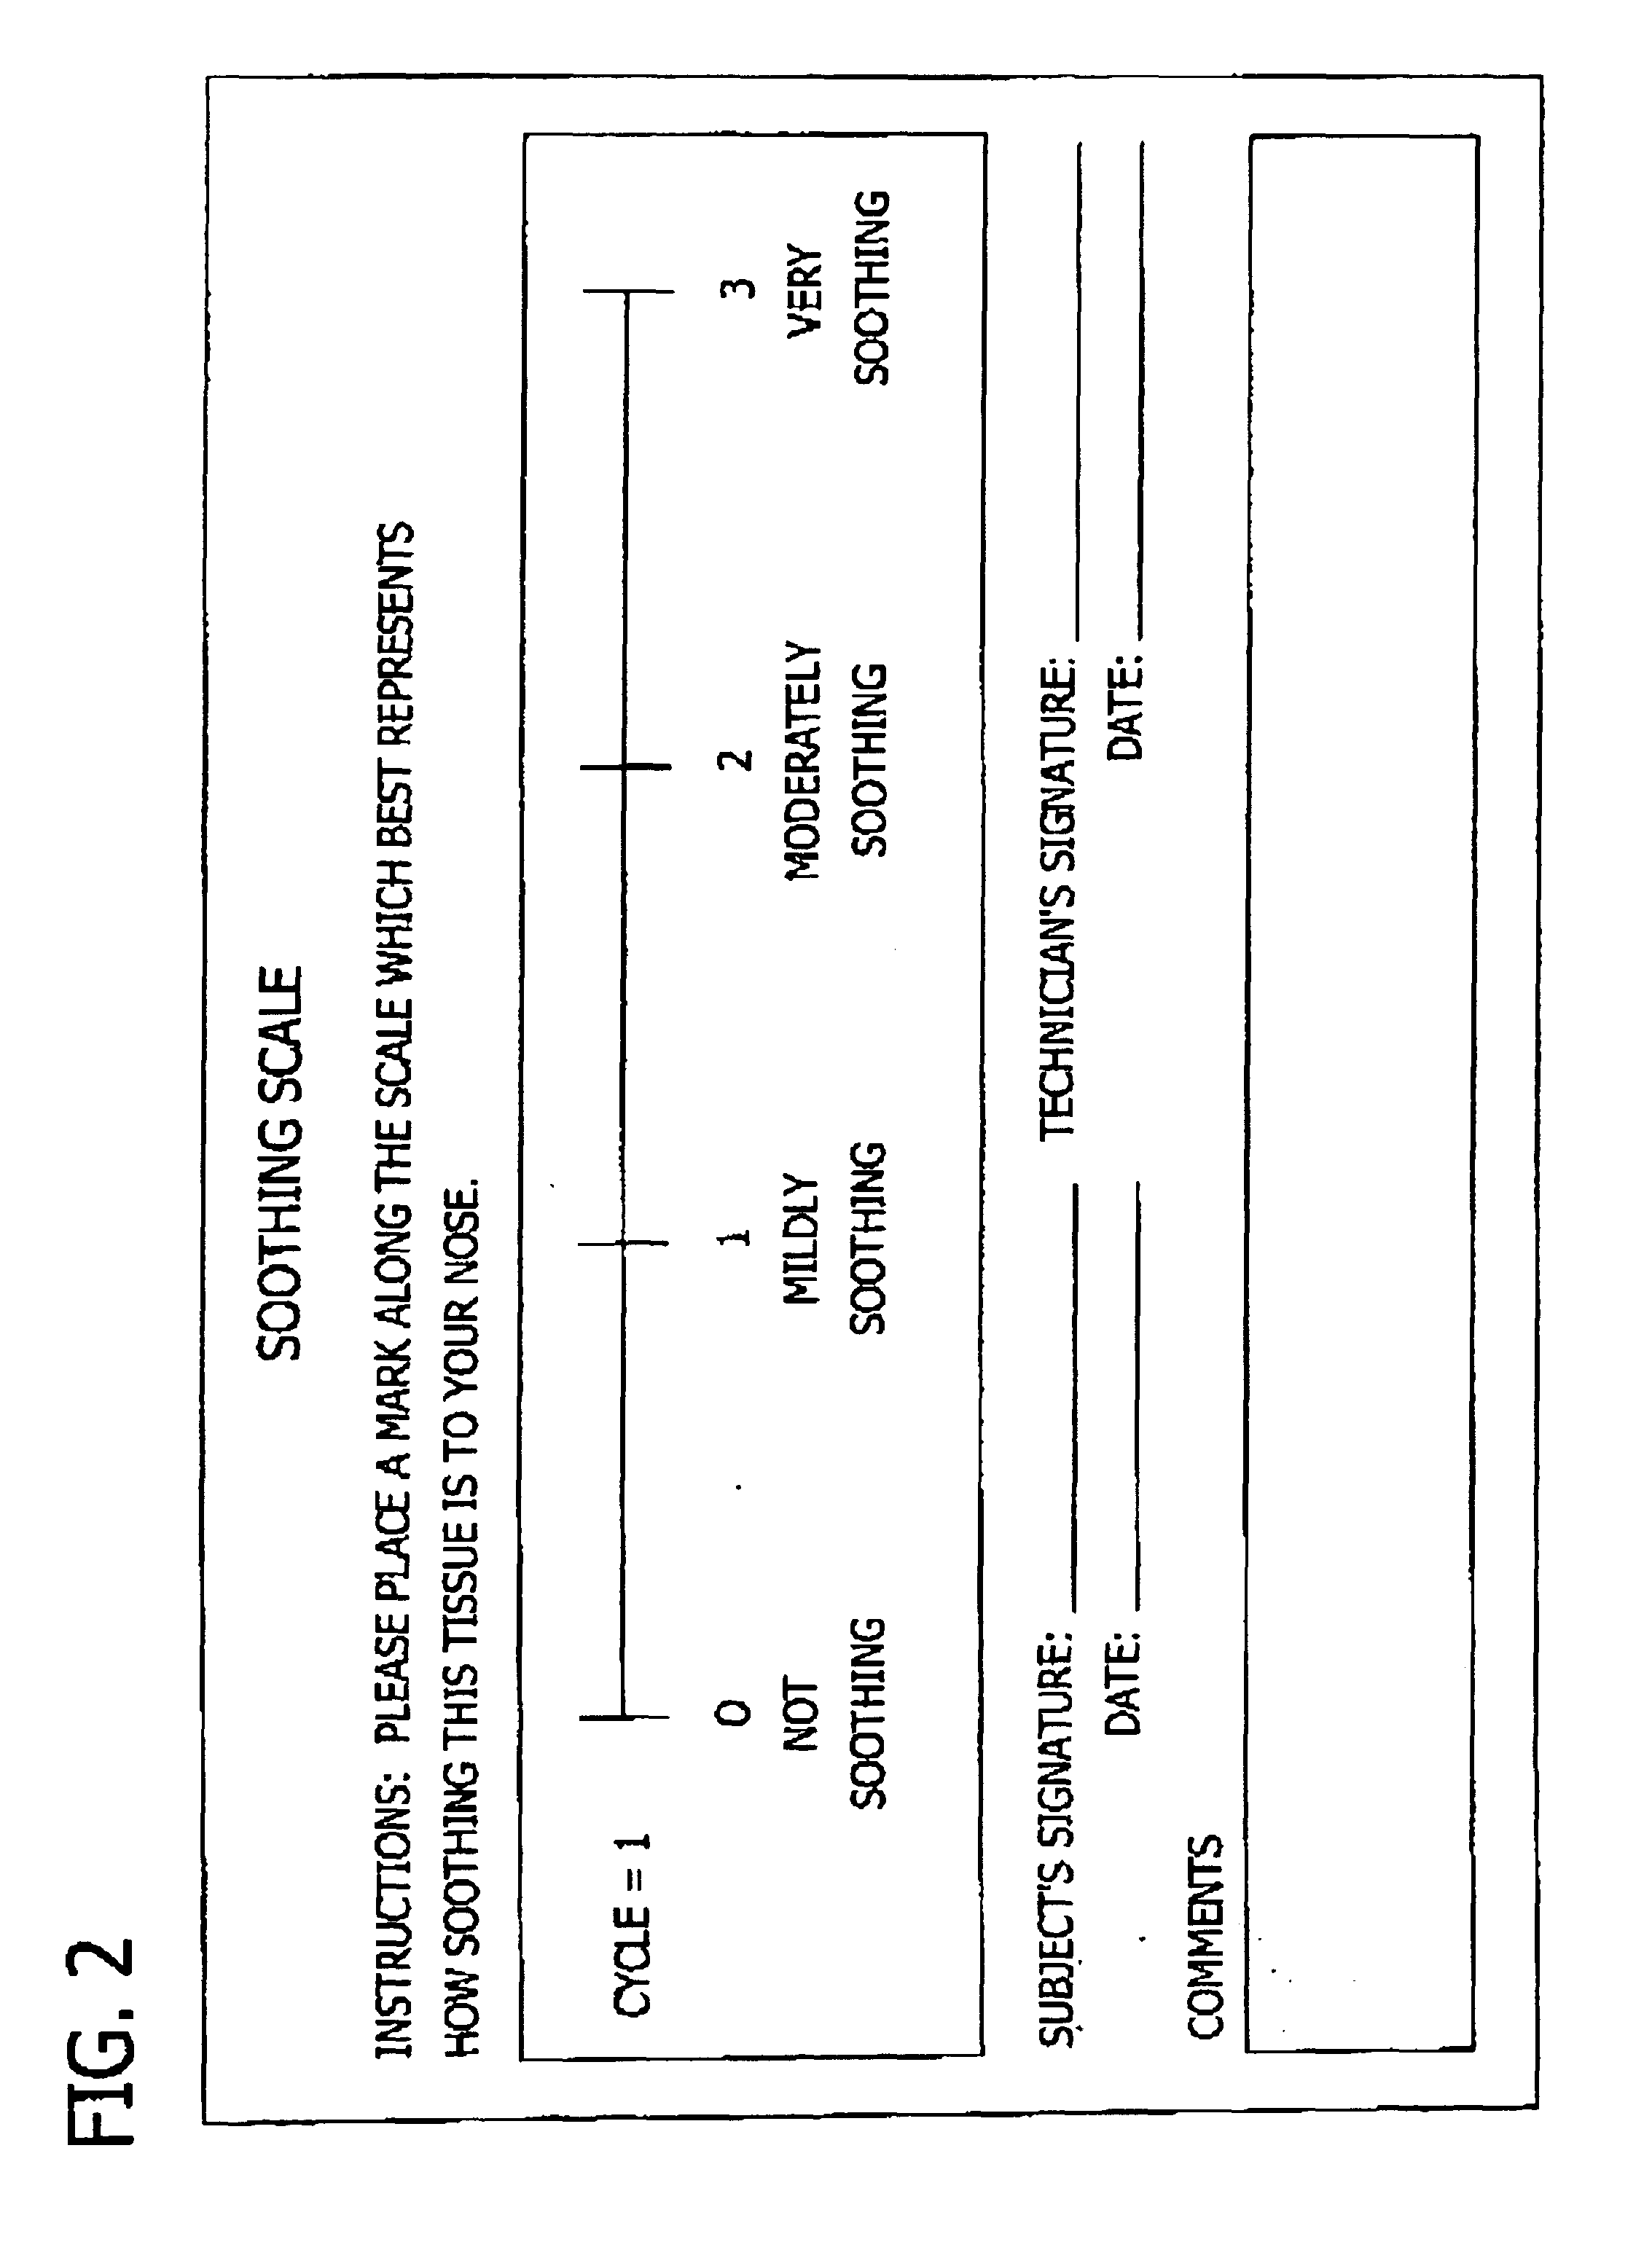 Method of collecting data relating to attributes of personal care articles and compositions